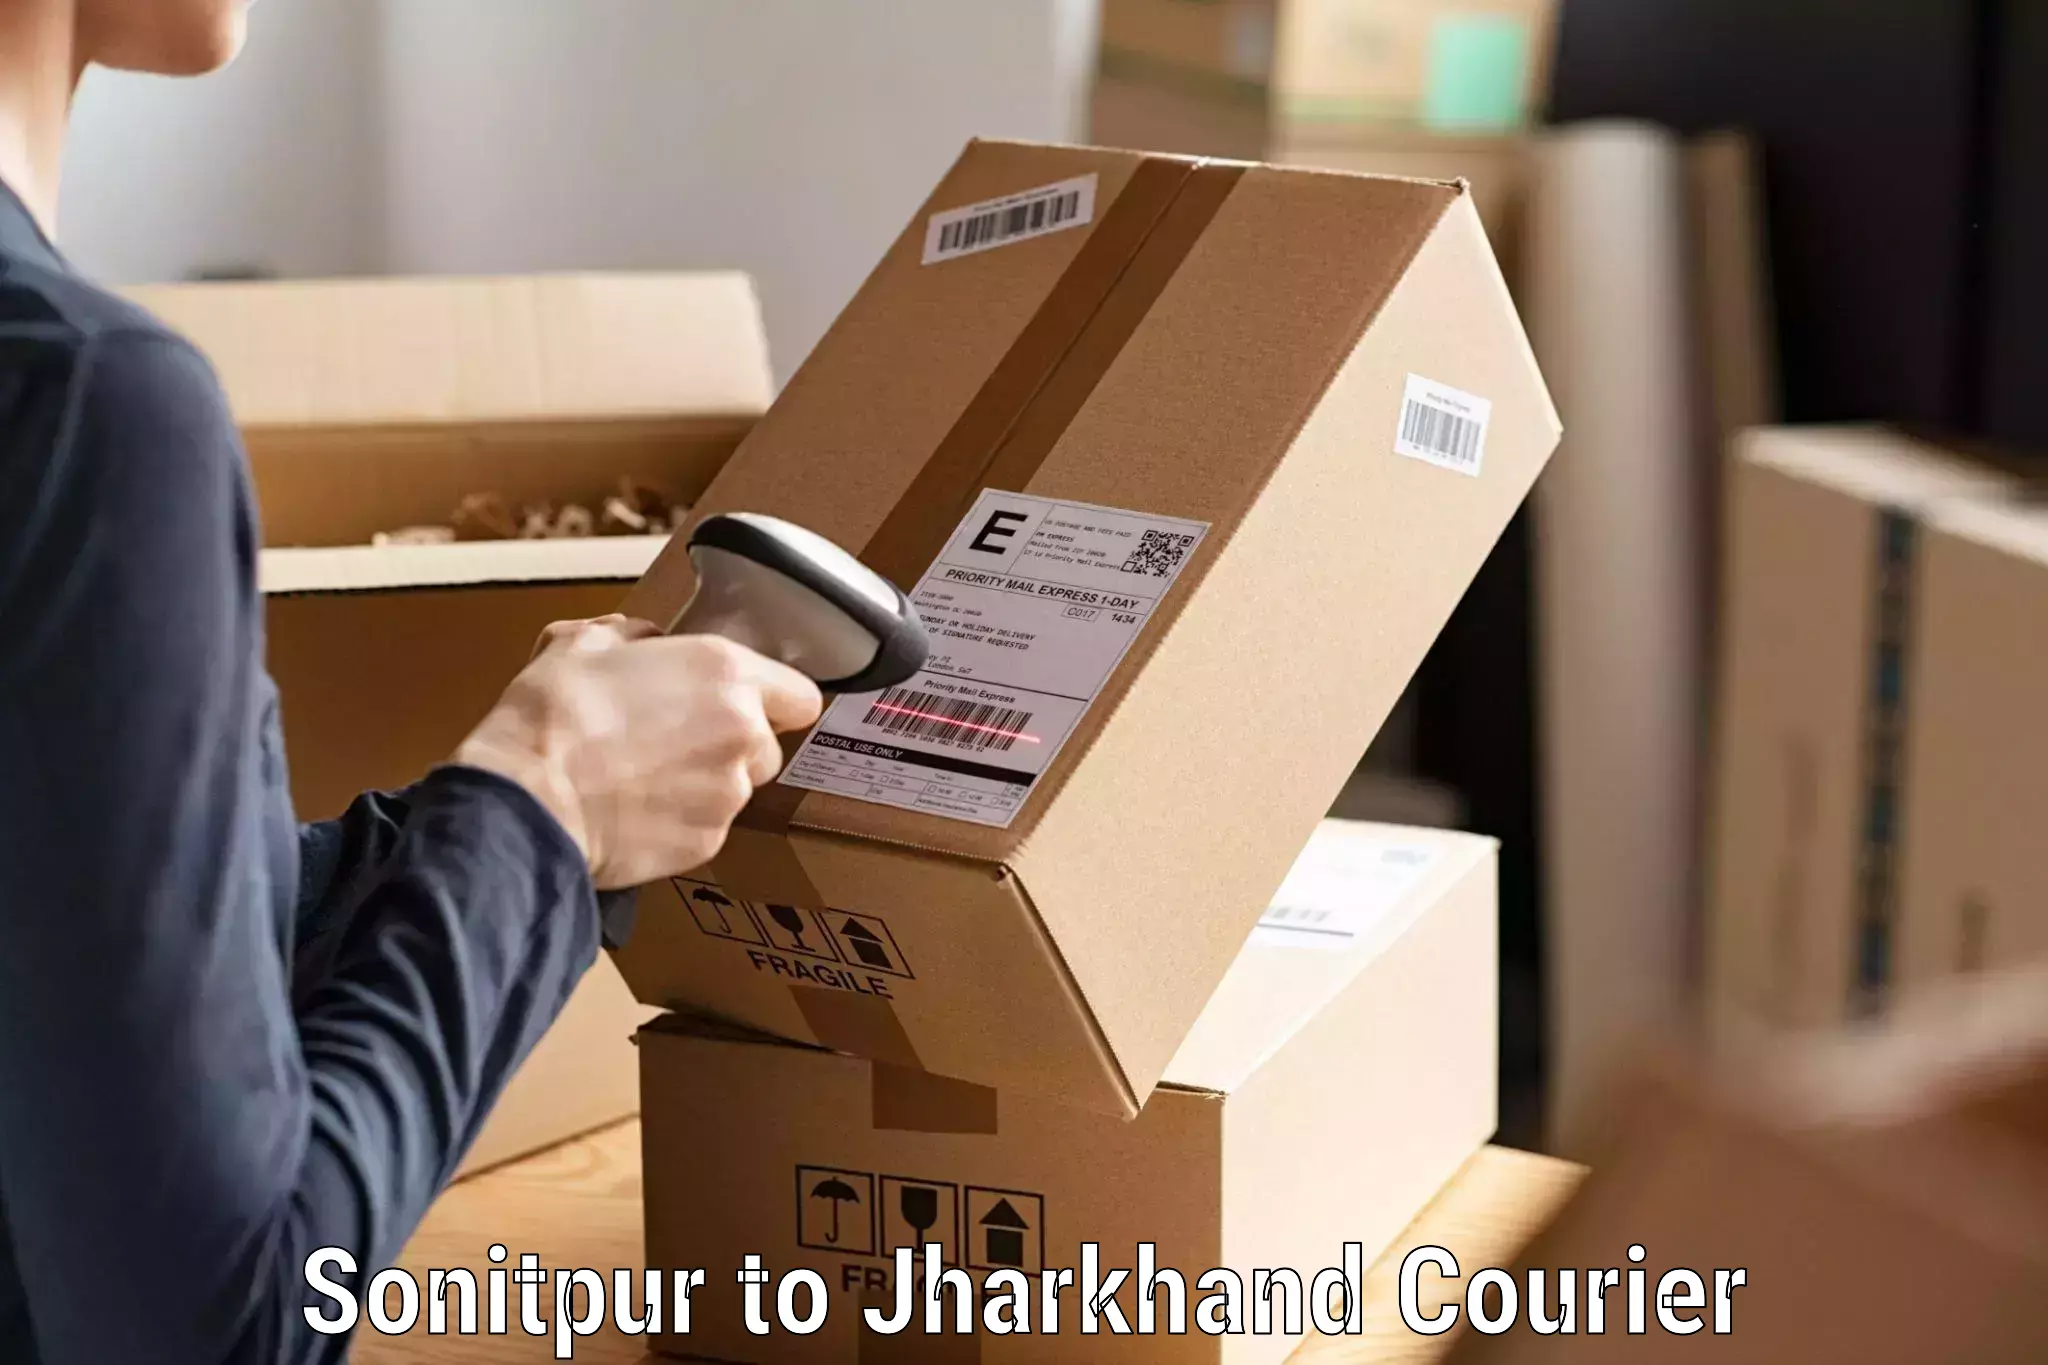 Air courier services Sonitpur to Topchanchi